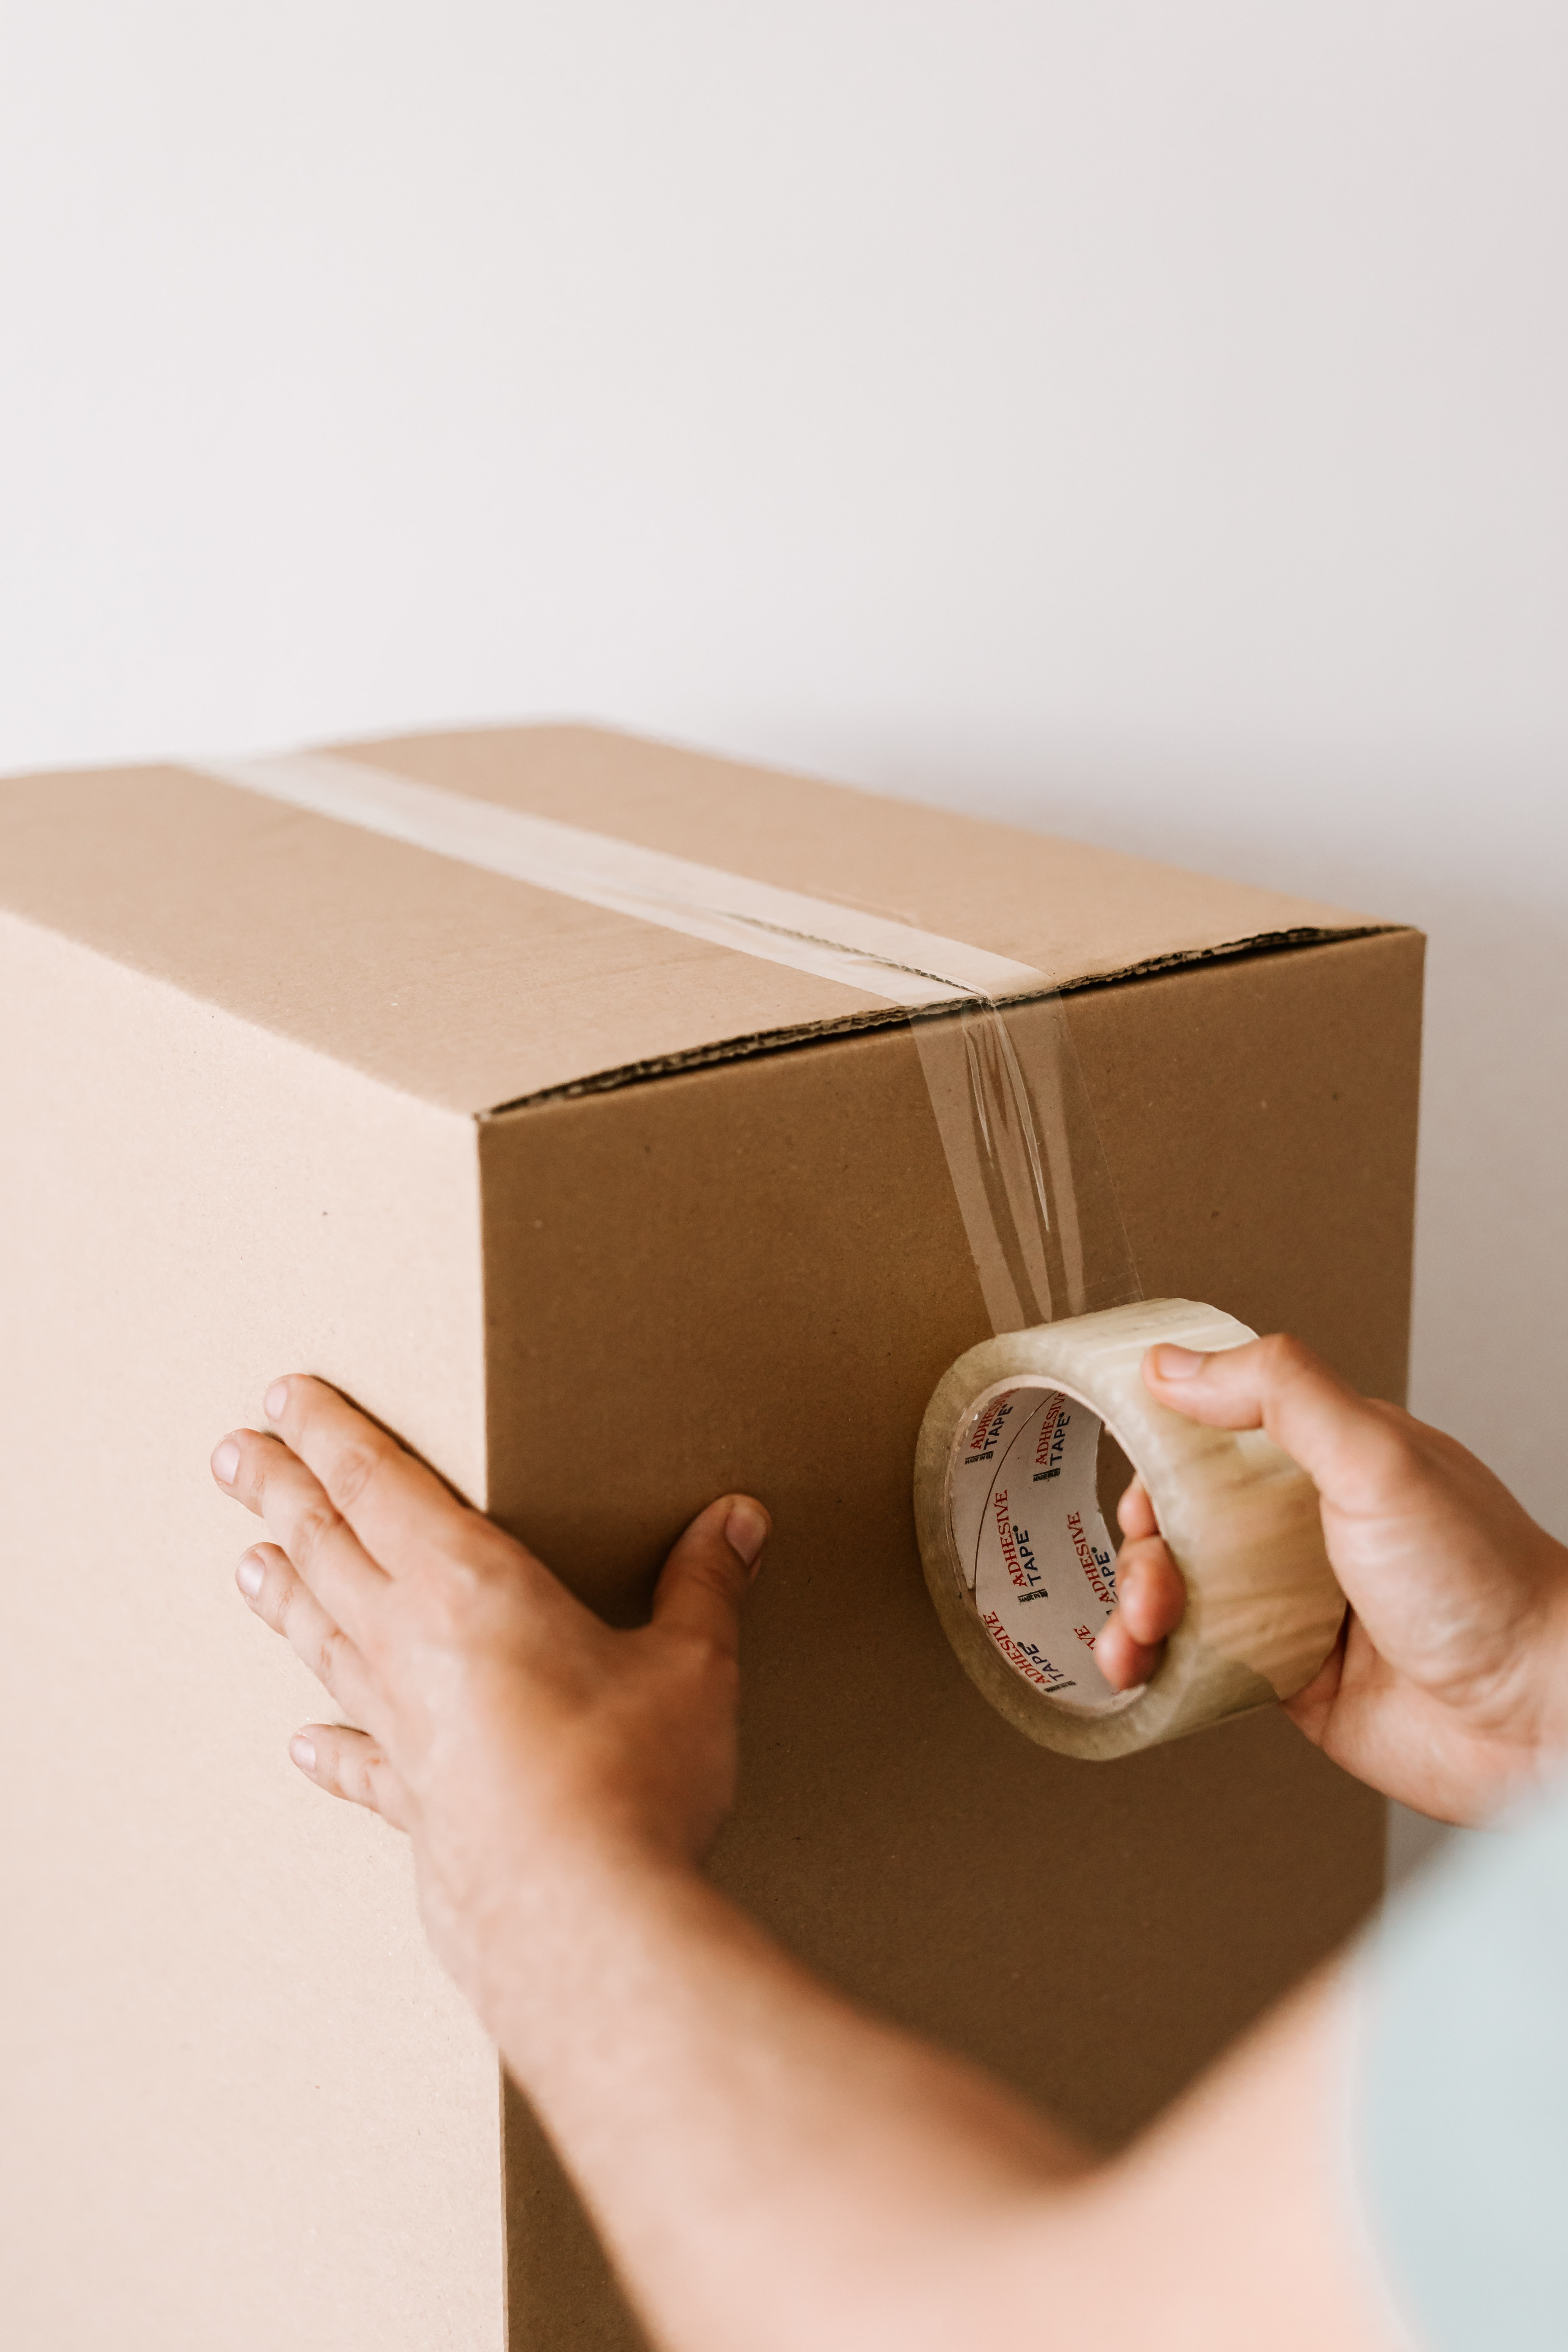 A hand tapes up a box ready for moving